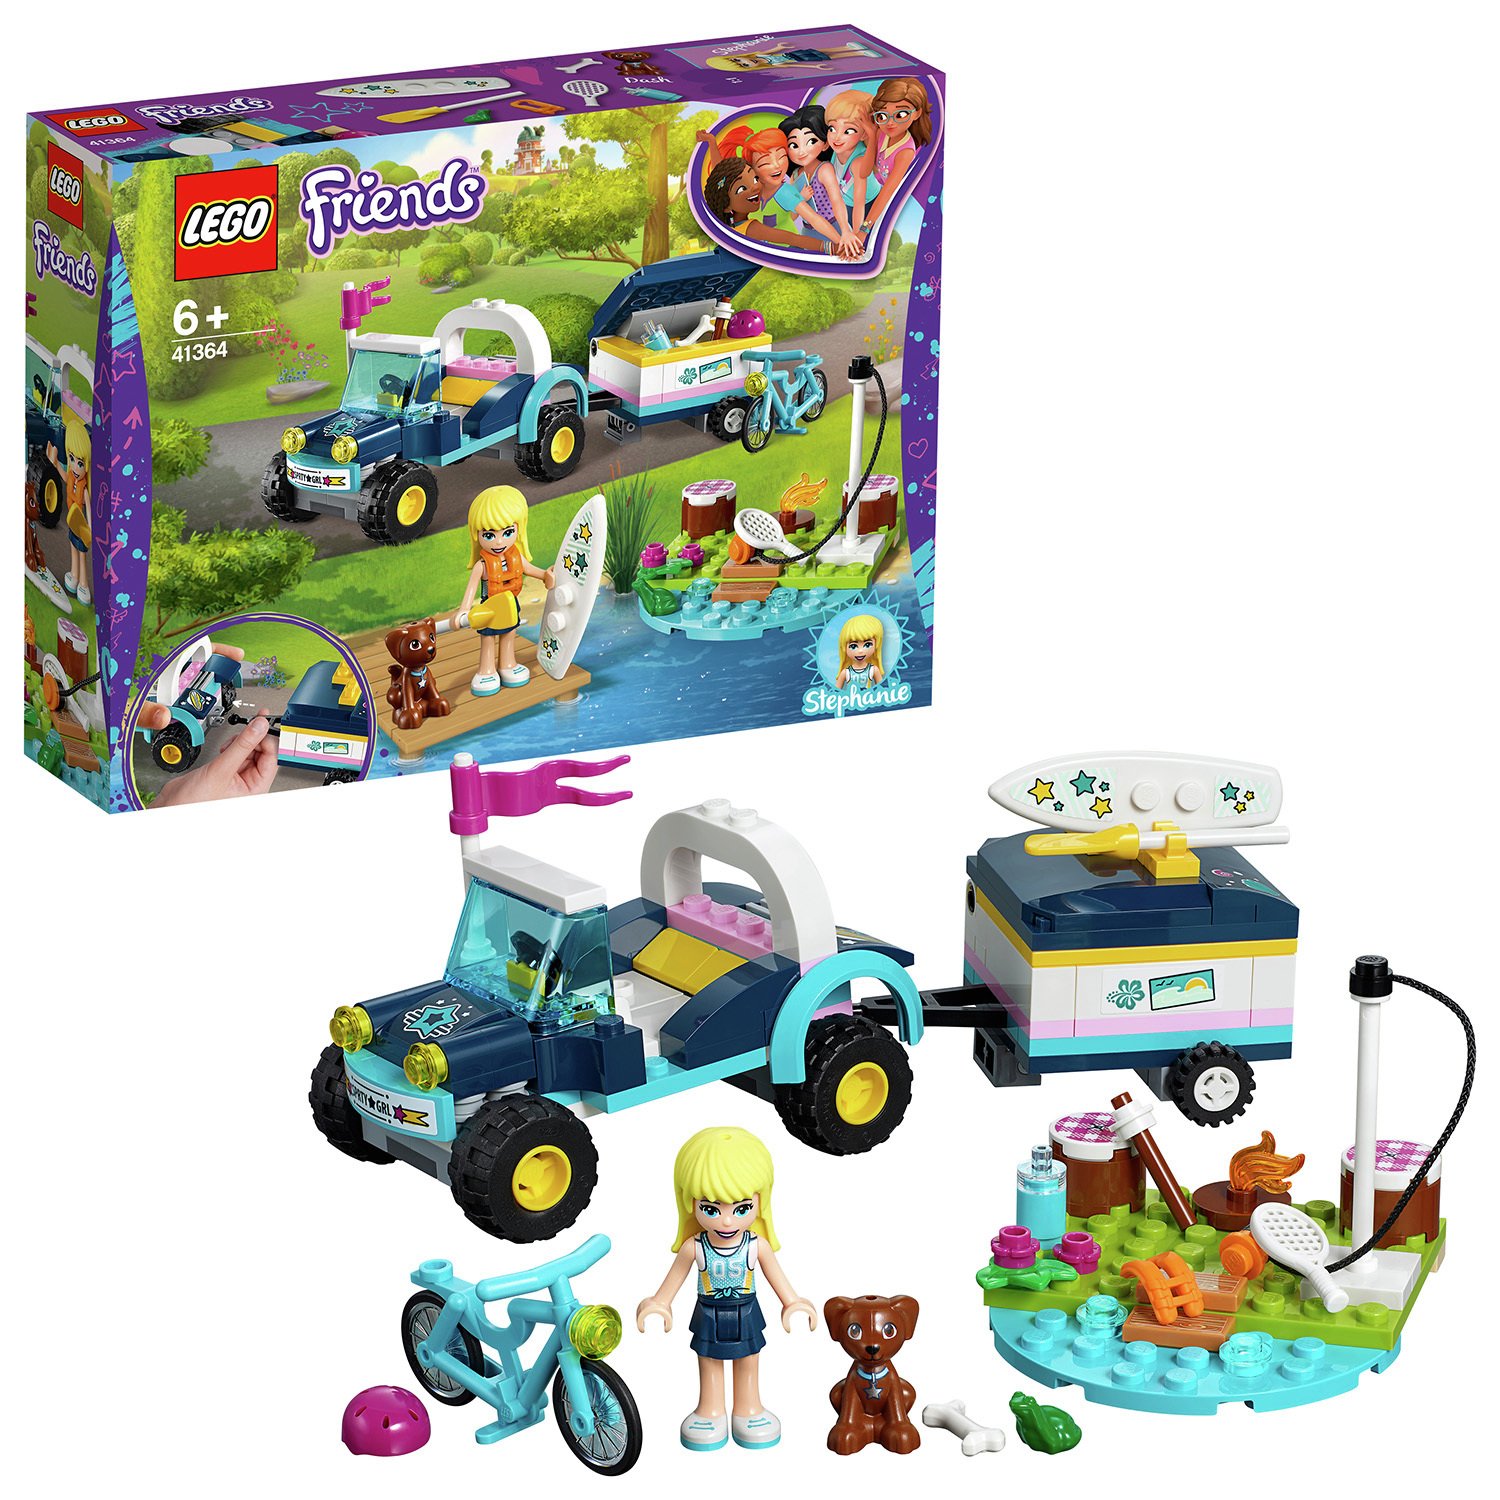 LEGO Friends Stephanie's Toy Buggy and Trailer - 41364